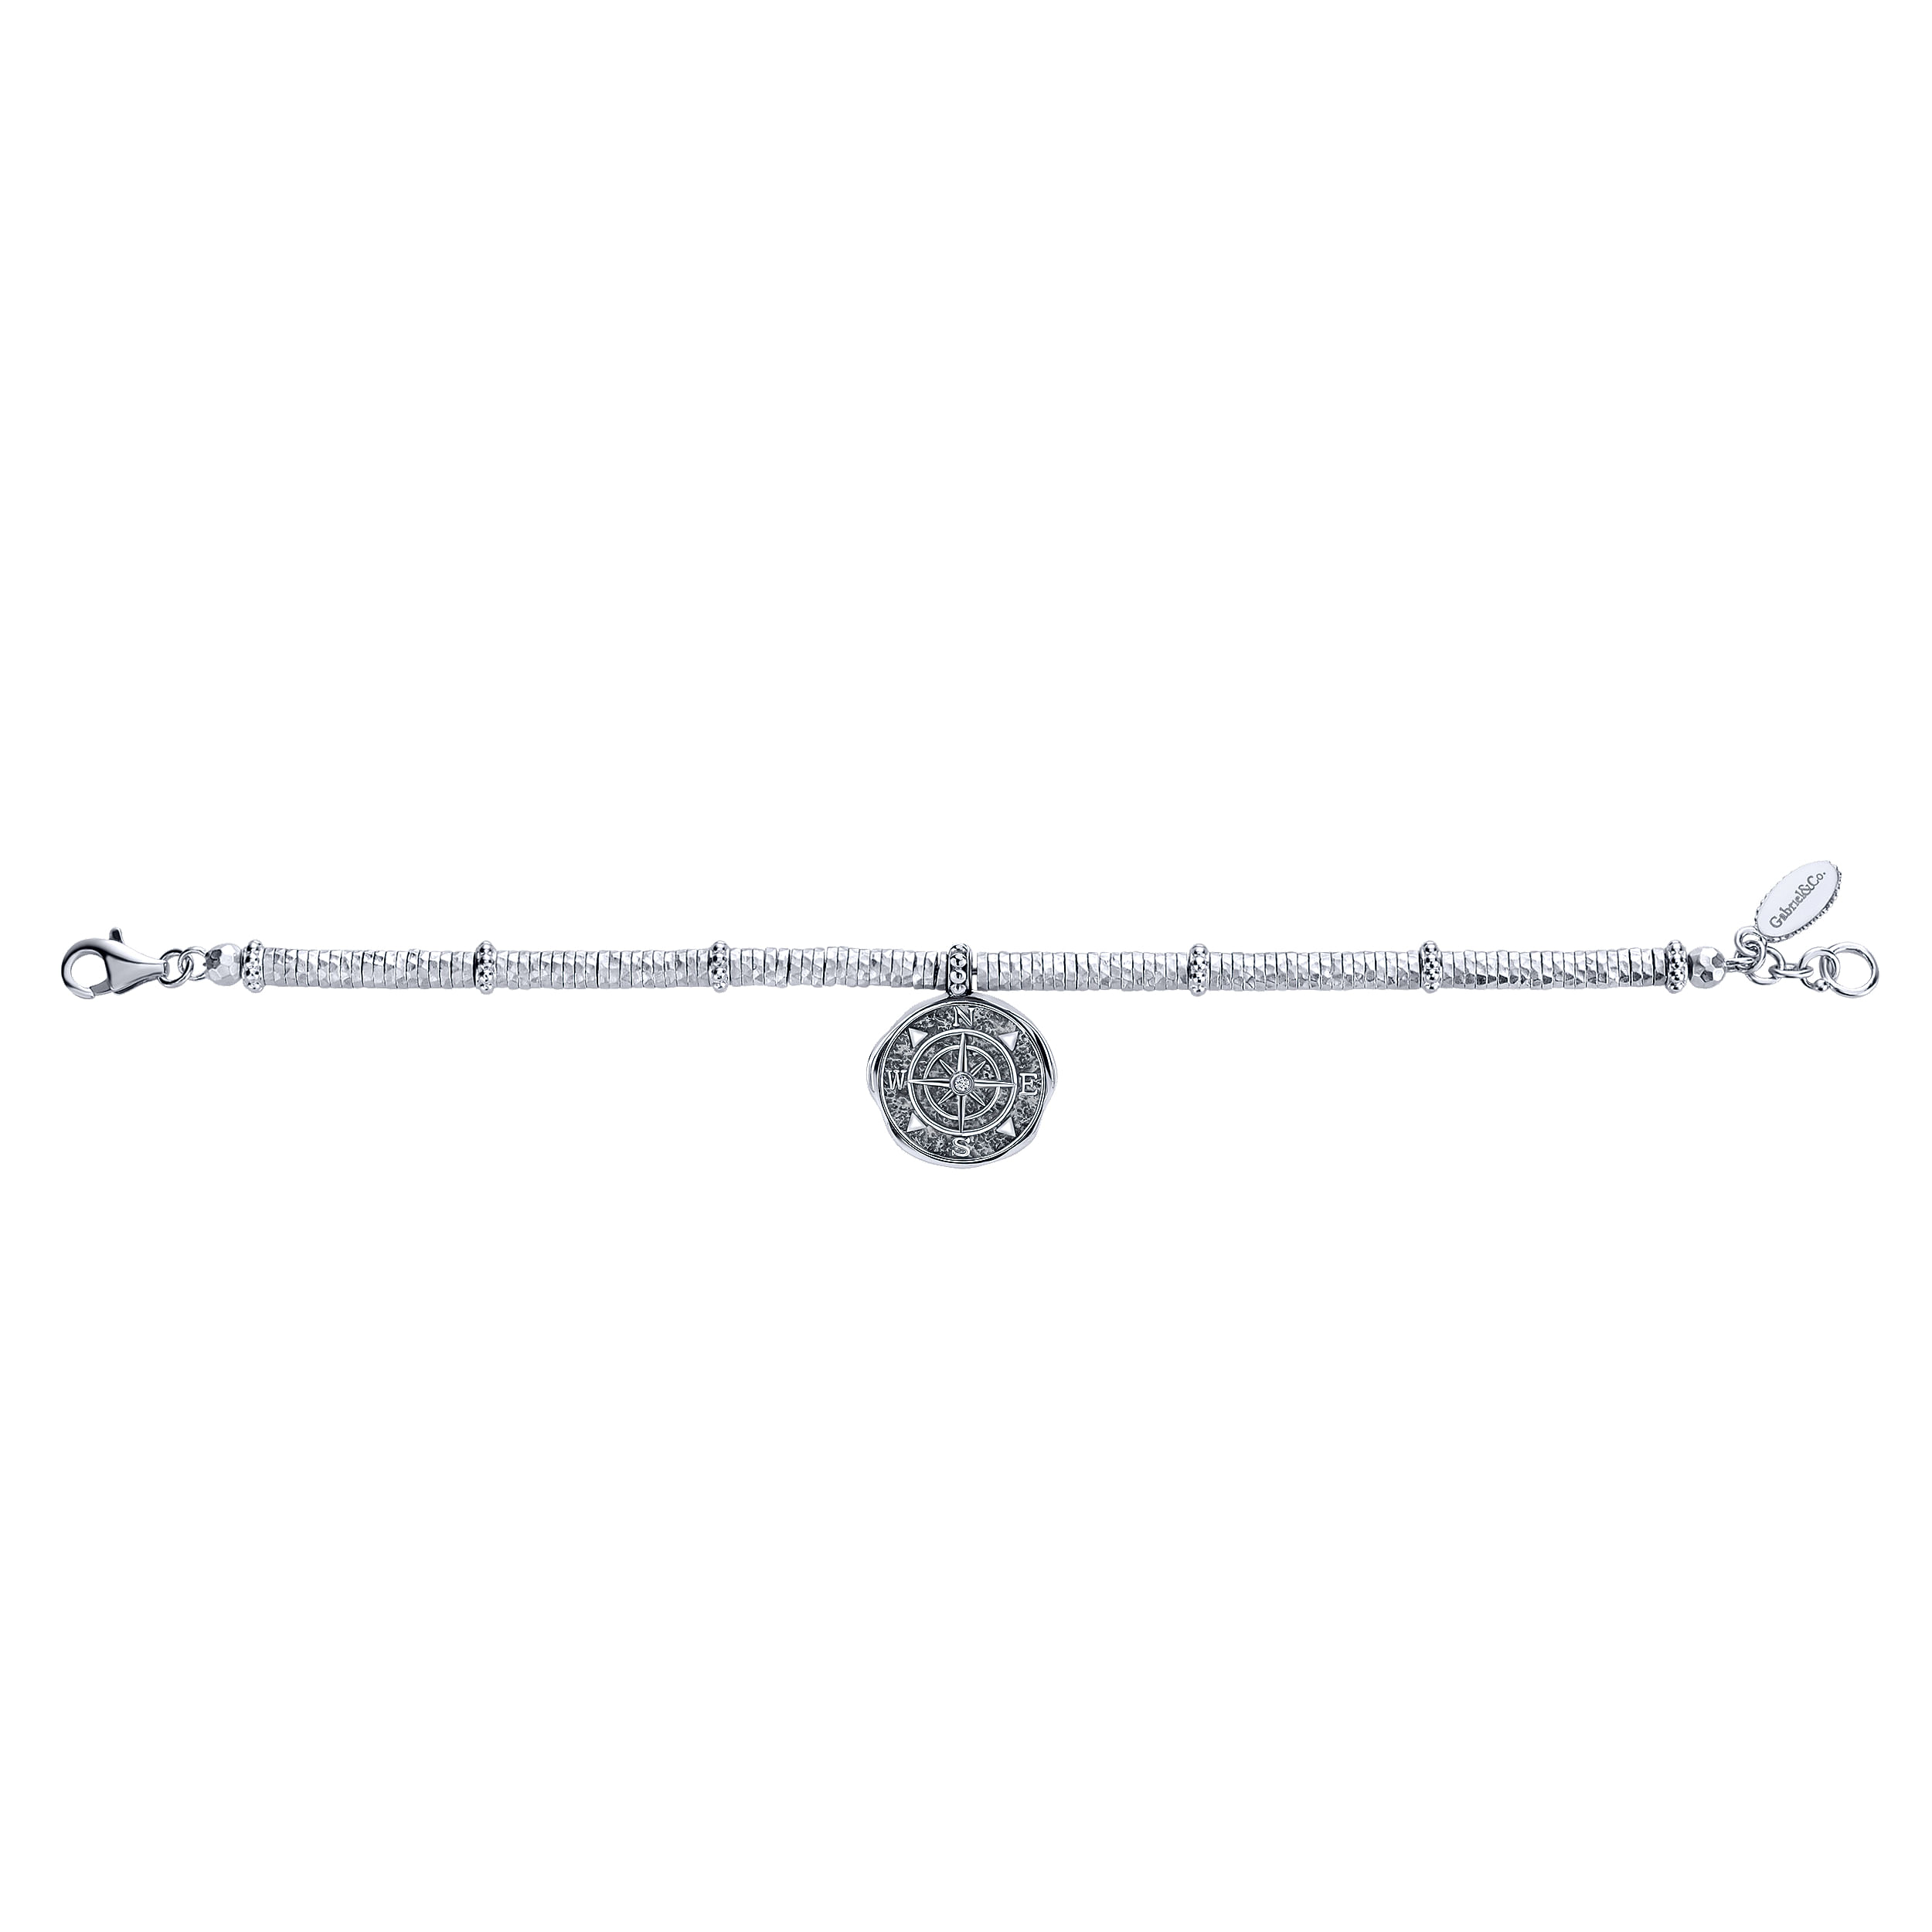 Stainless Steel and 925 Sterling Silver Compass Charm Bracelet with White Sapphire